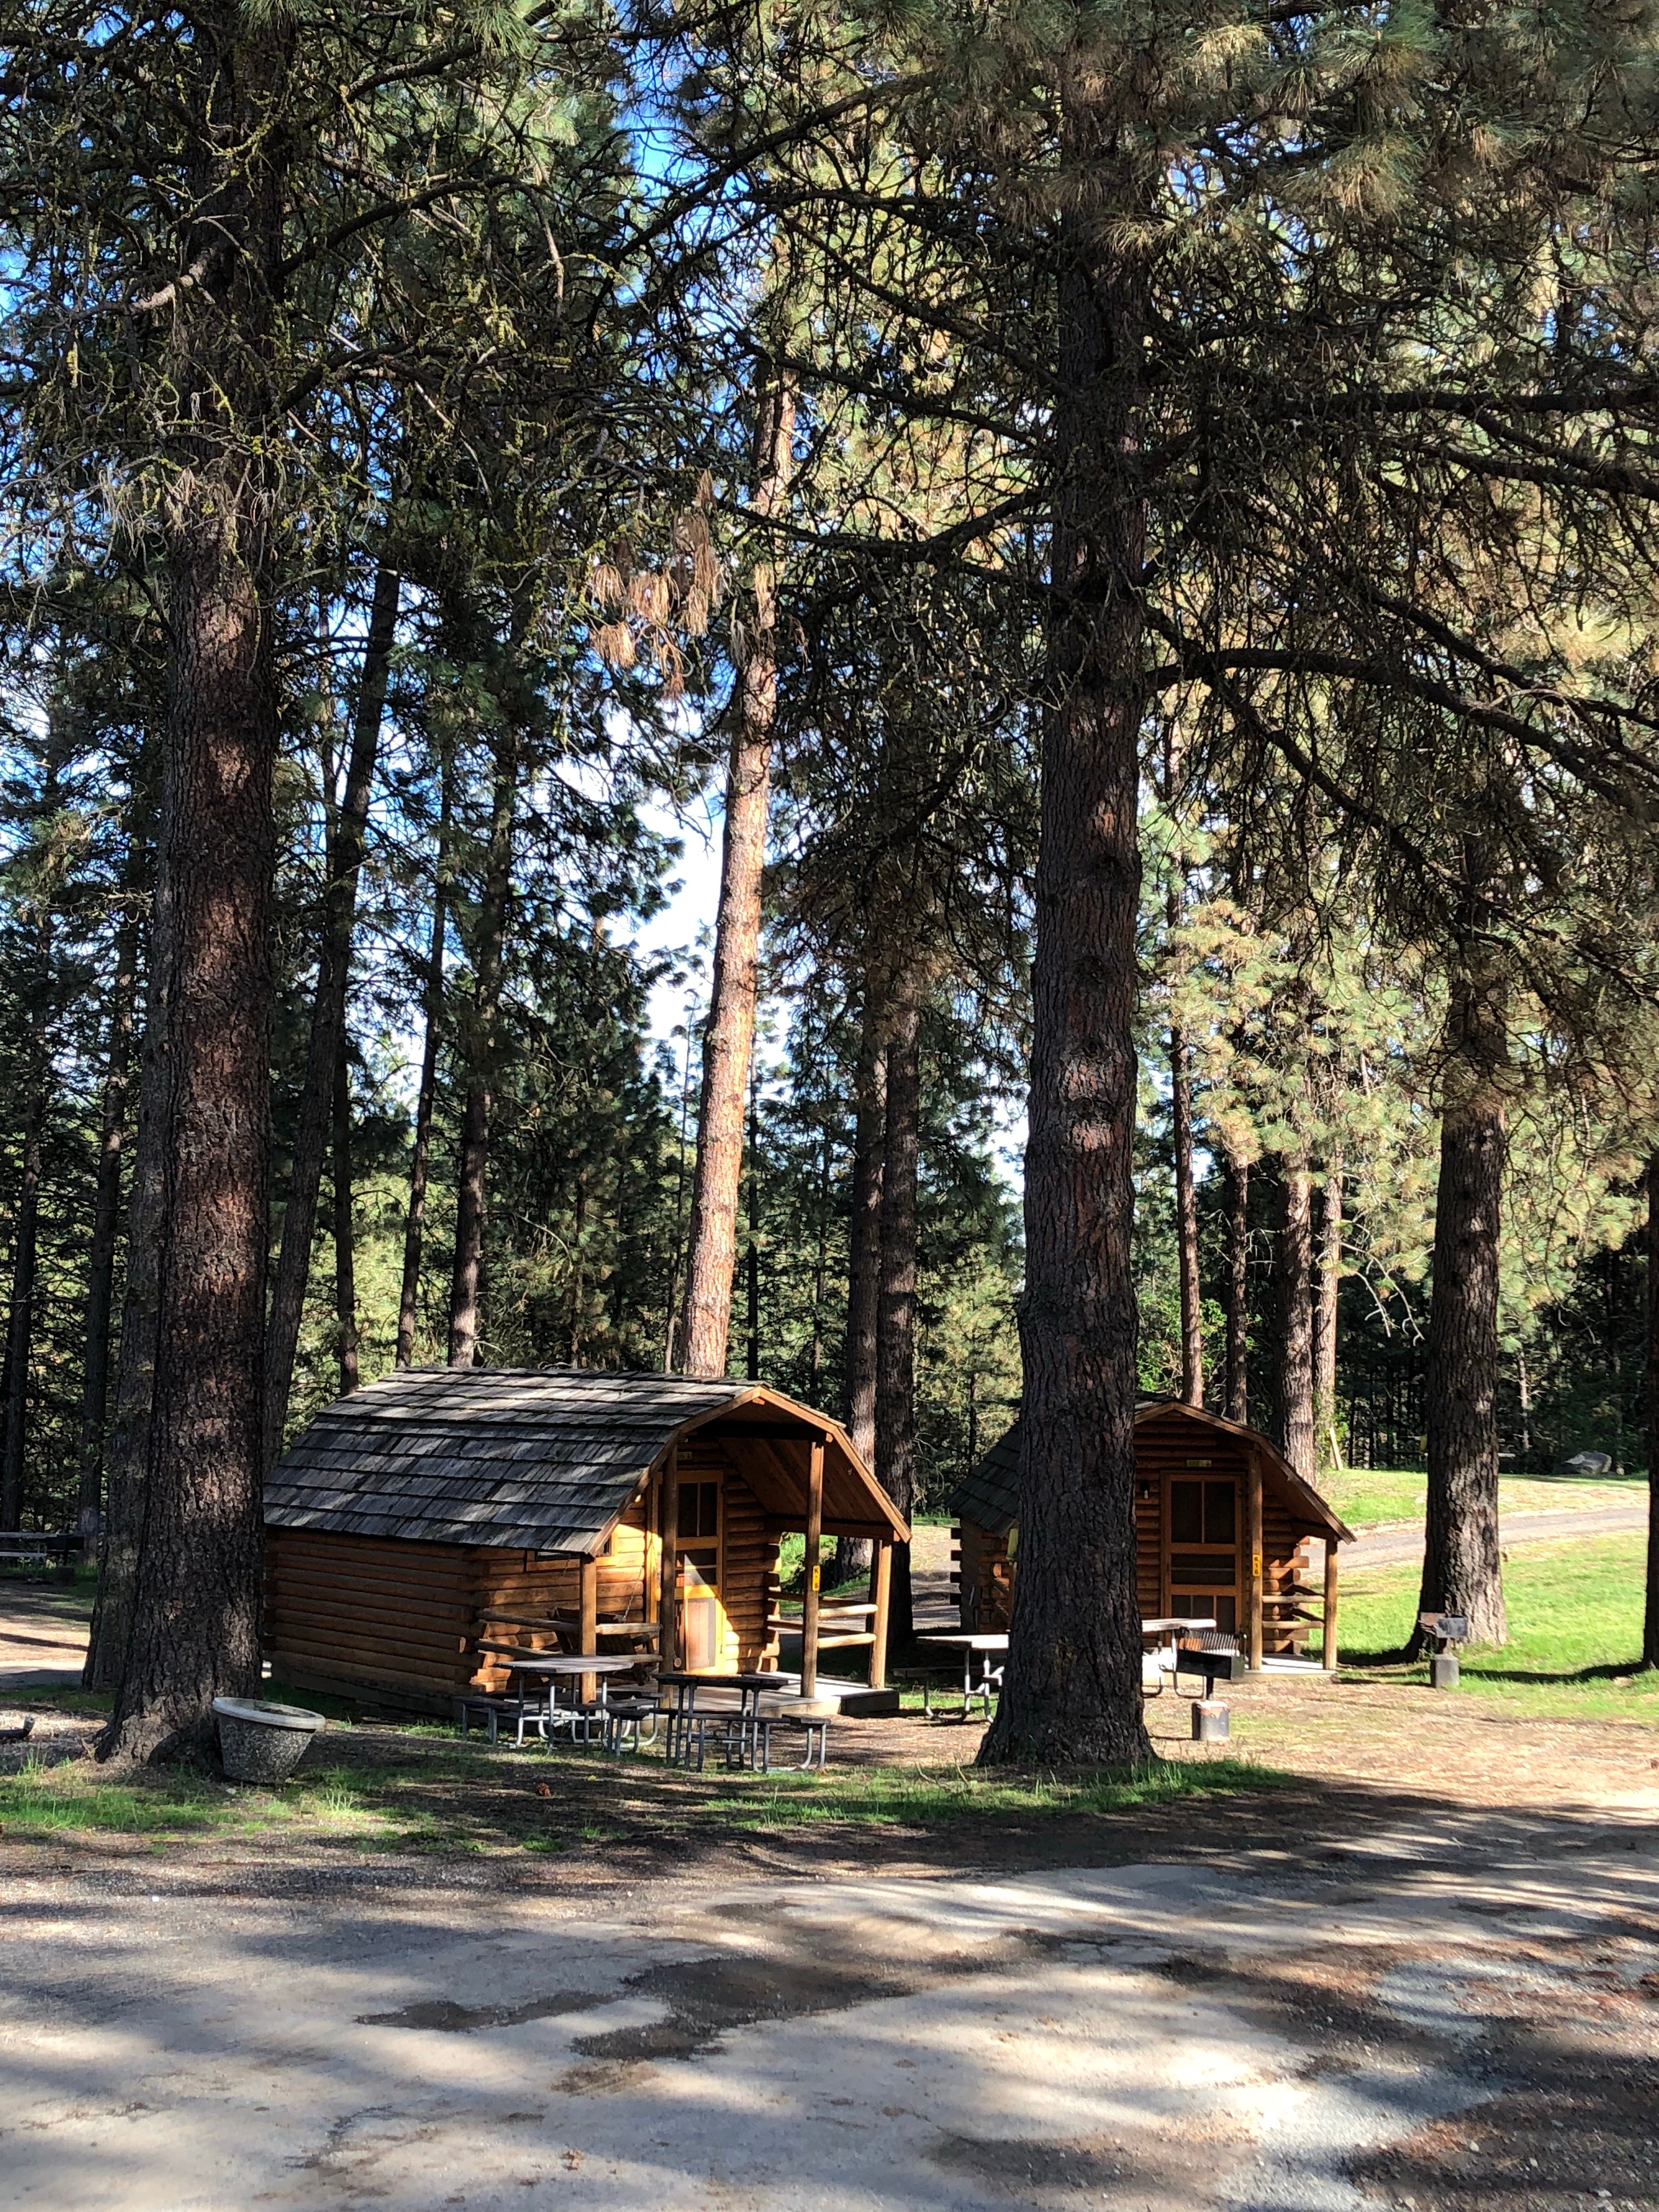 Camper submitted image from Leavenworth-Pine Village KOA - 2